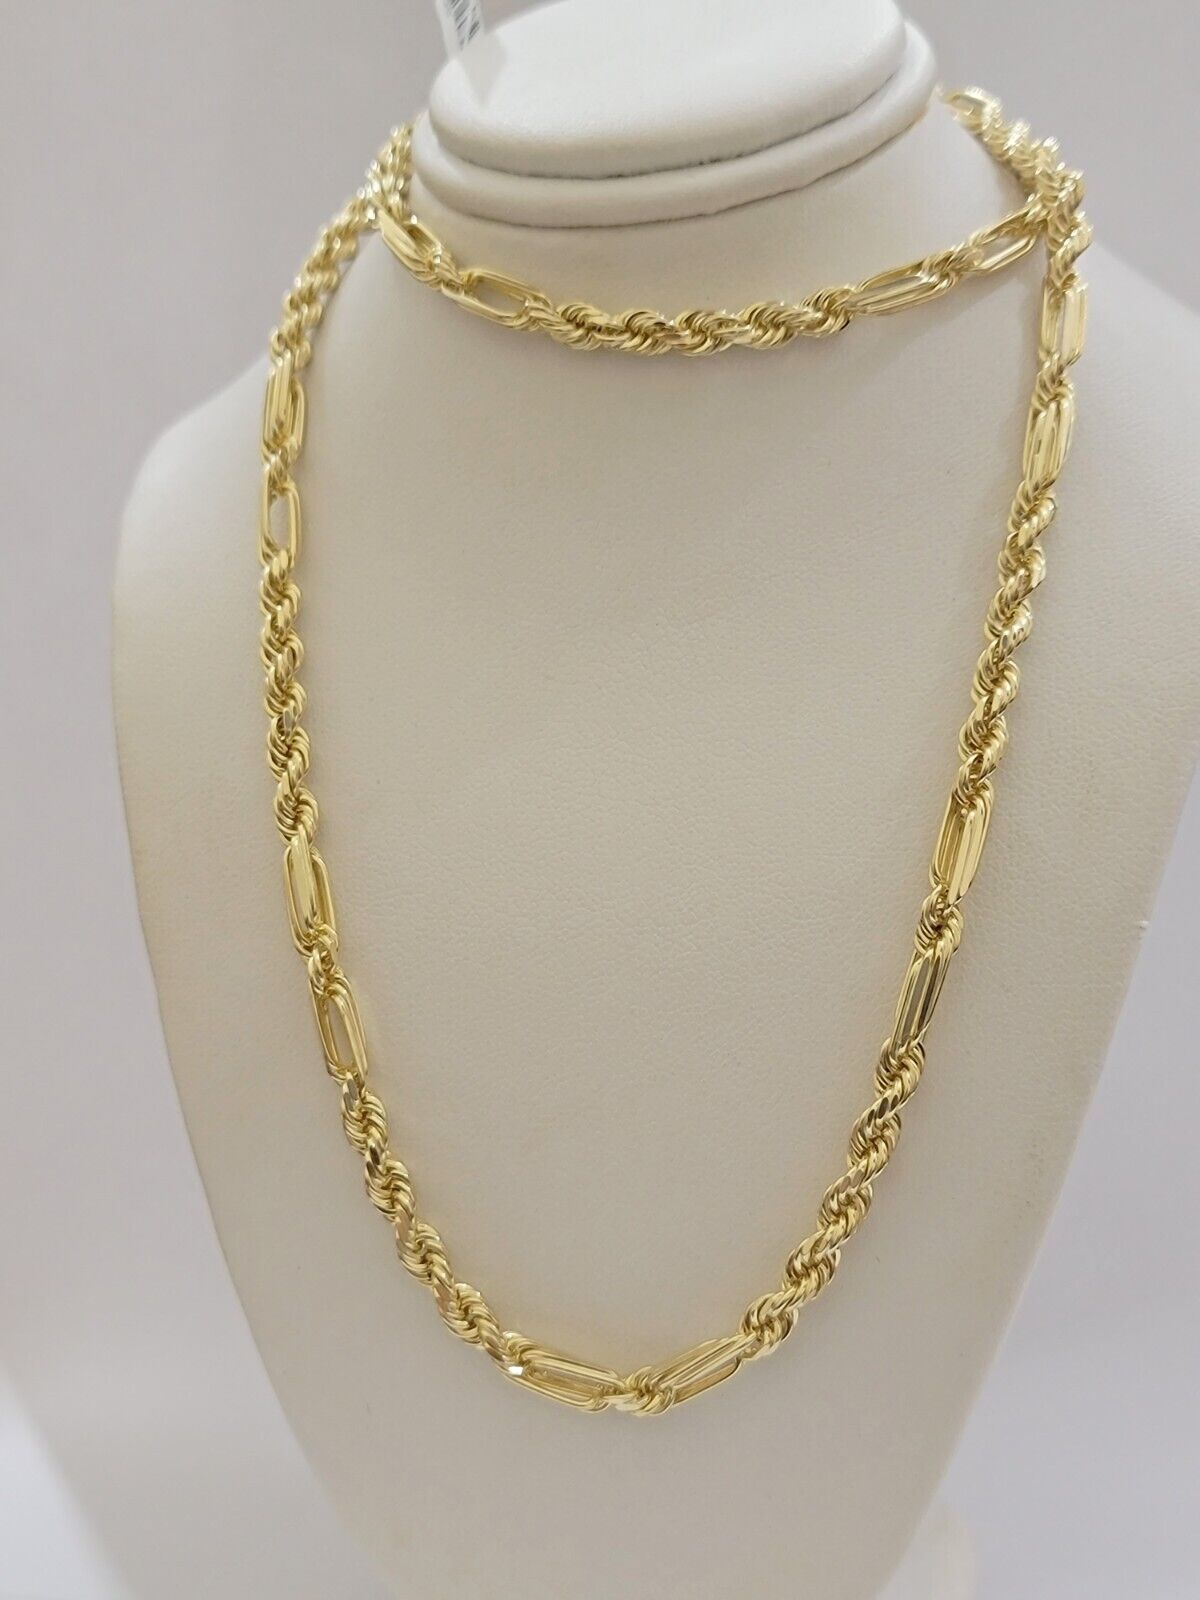 Solid 10k Gold Milano Rope Chain Necklace 24